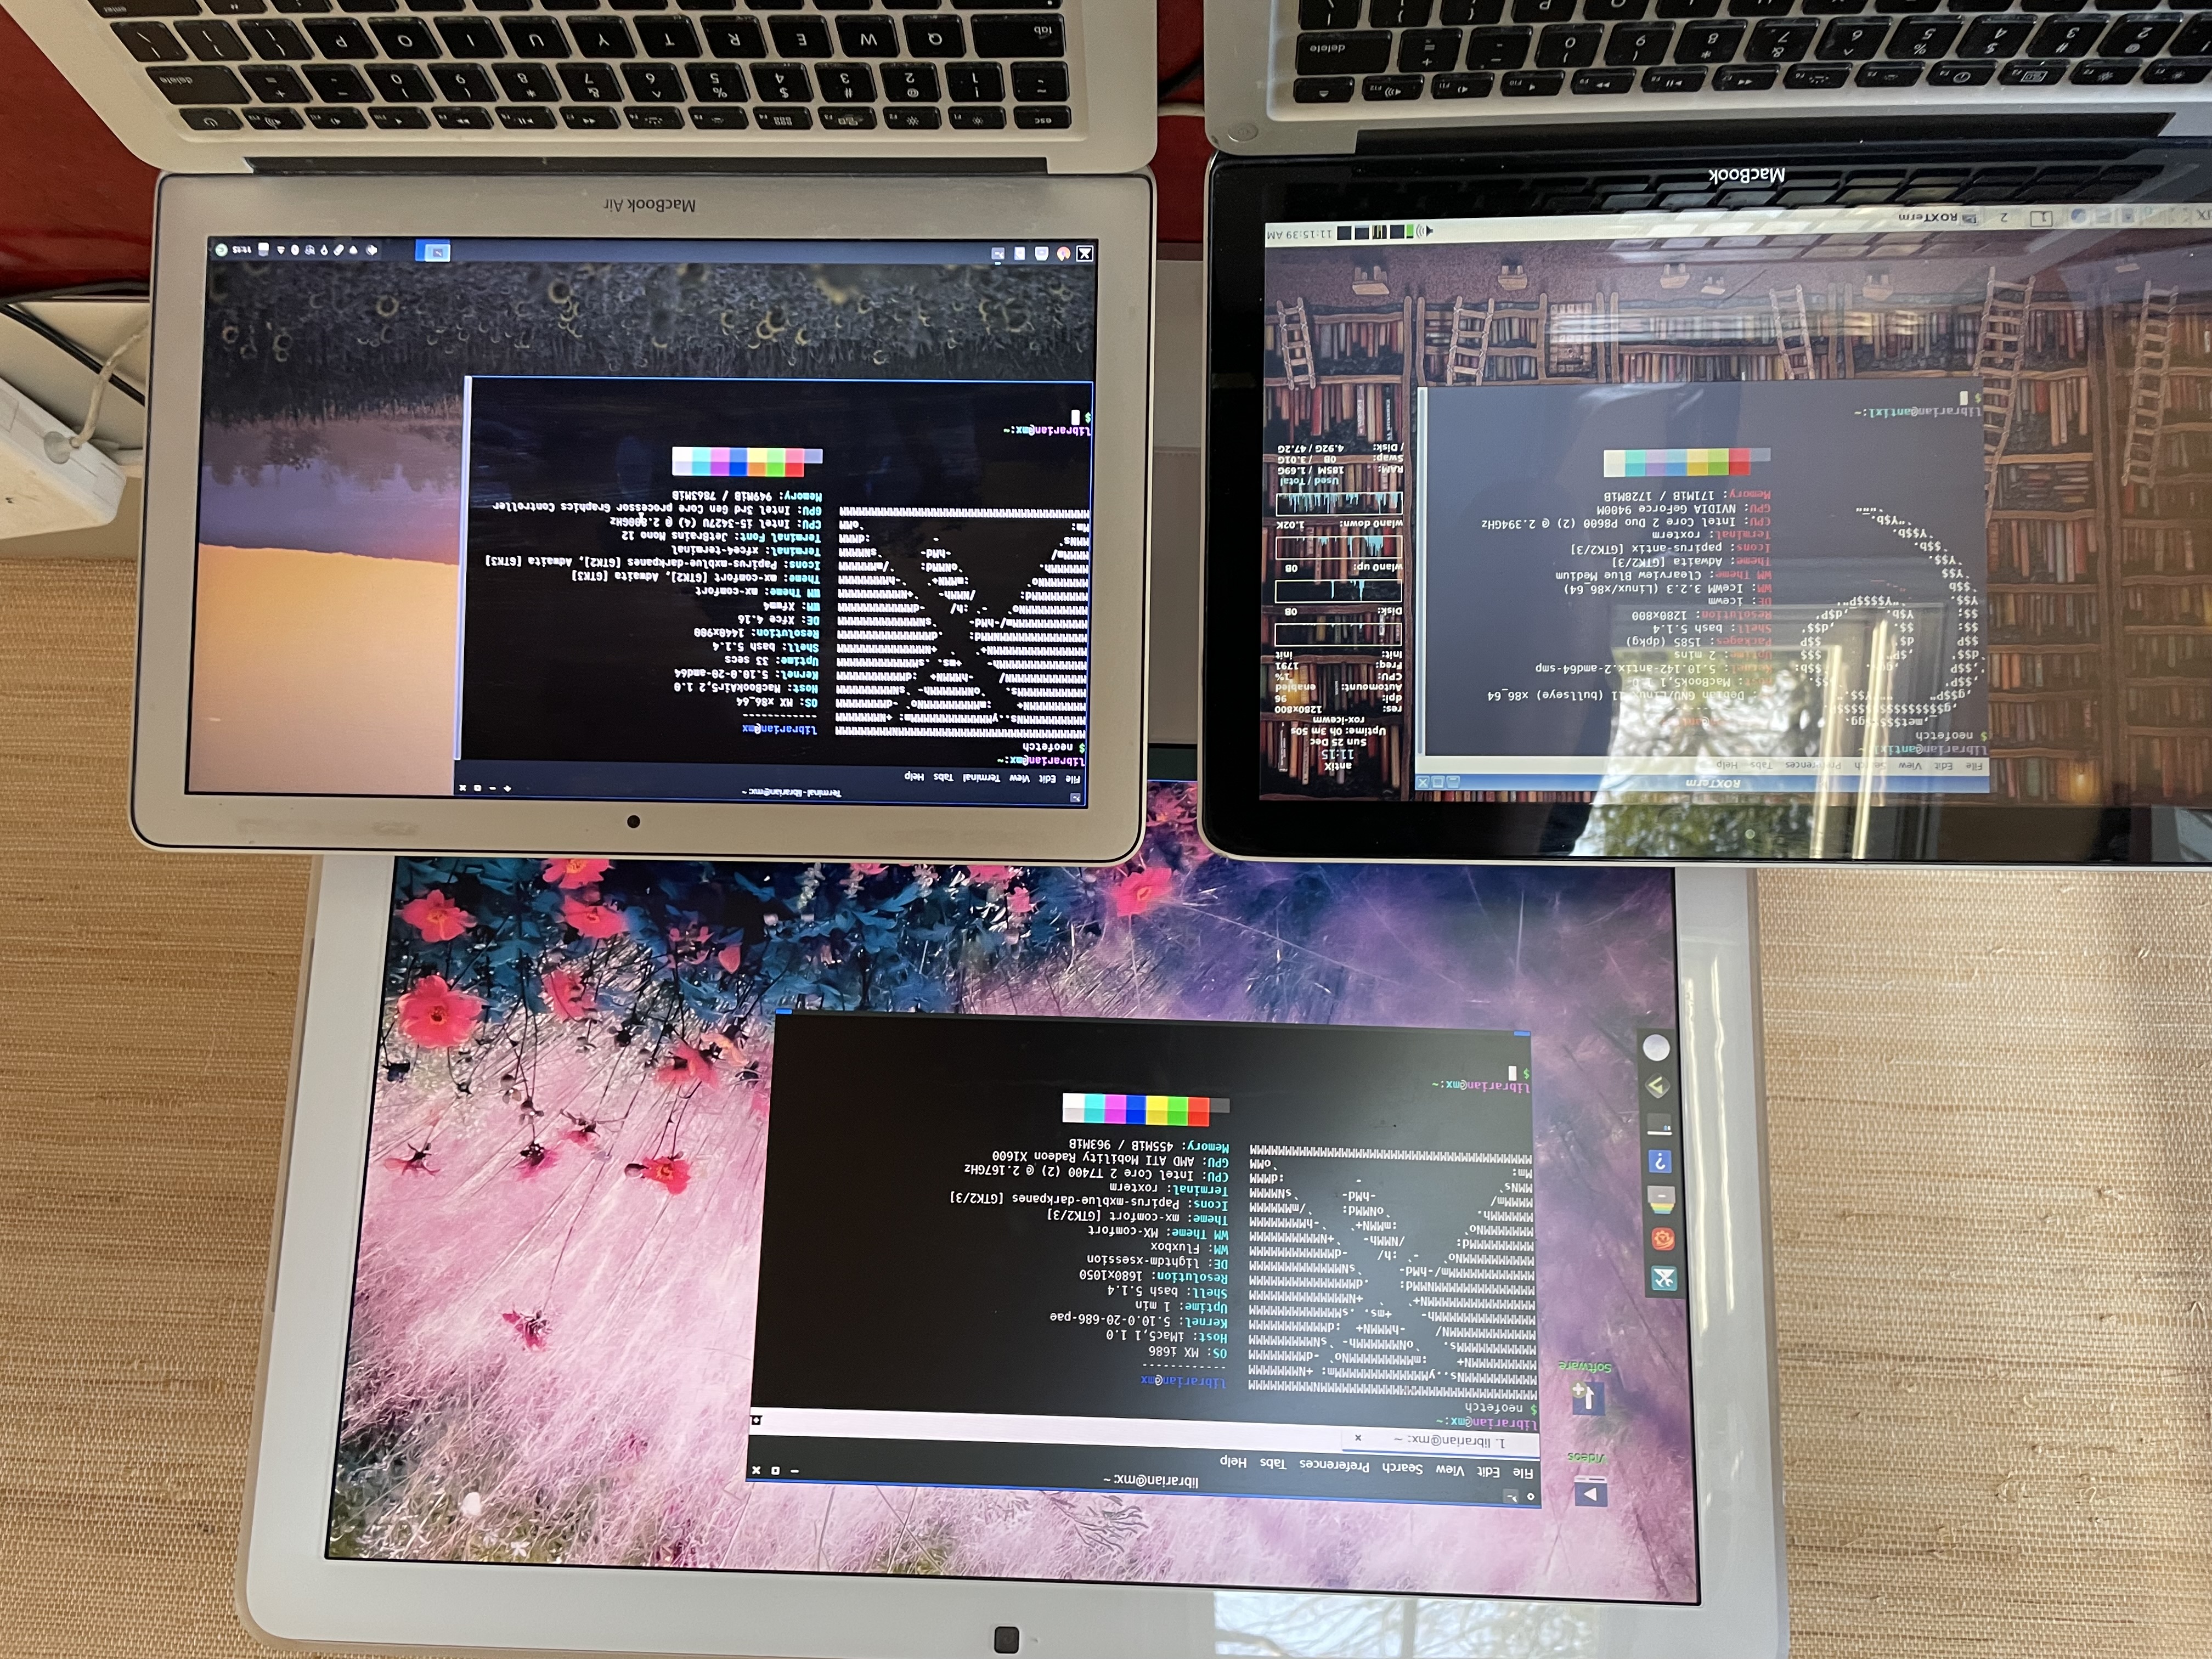 All 3 Macs, with Linux successfully installed